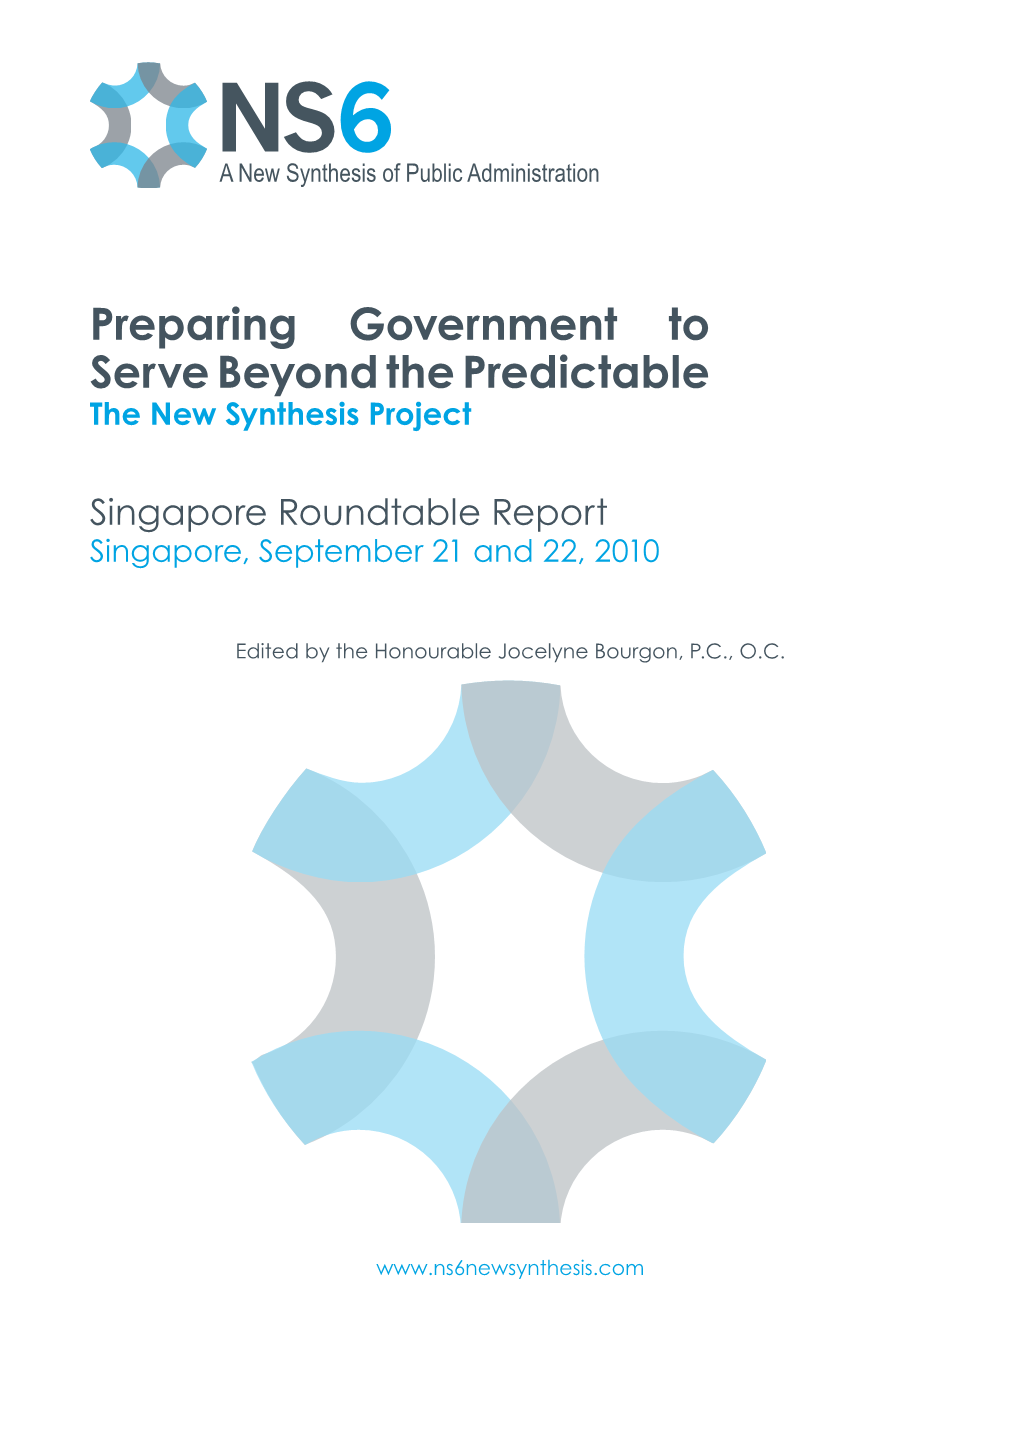 Preparing Government to Serve Beyond the Predictable: the New